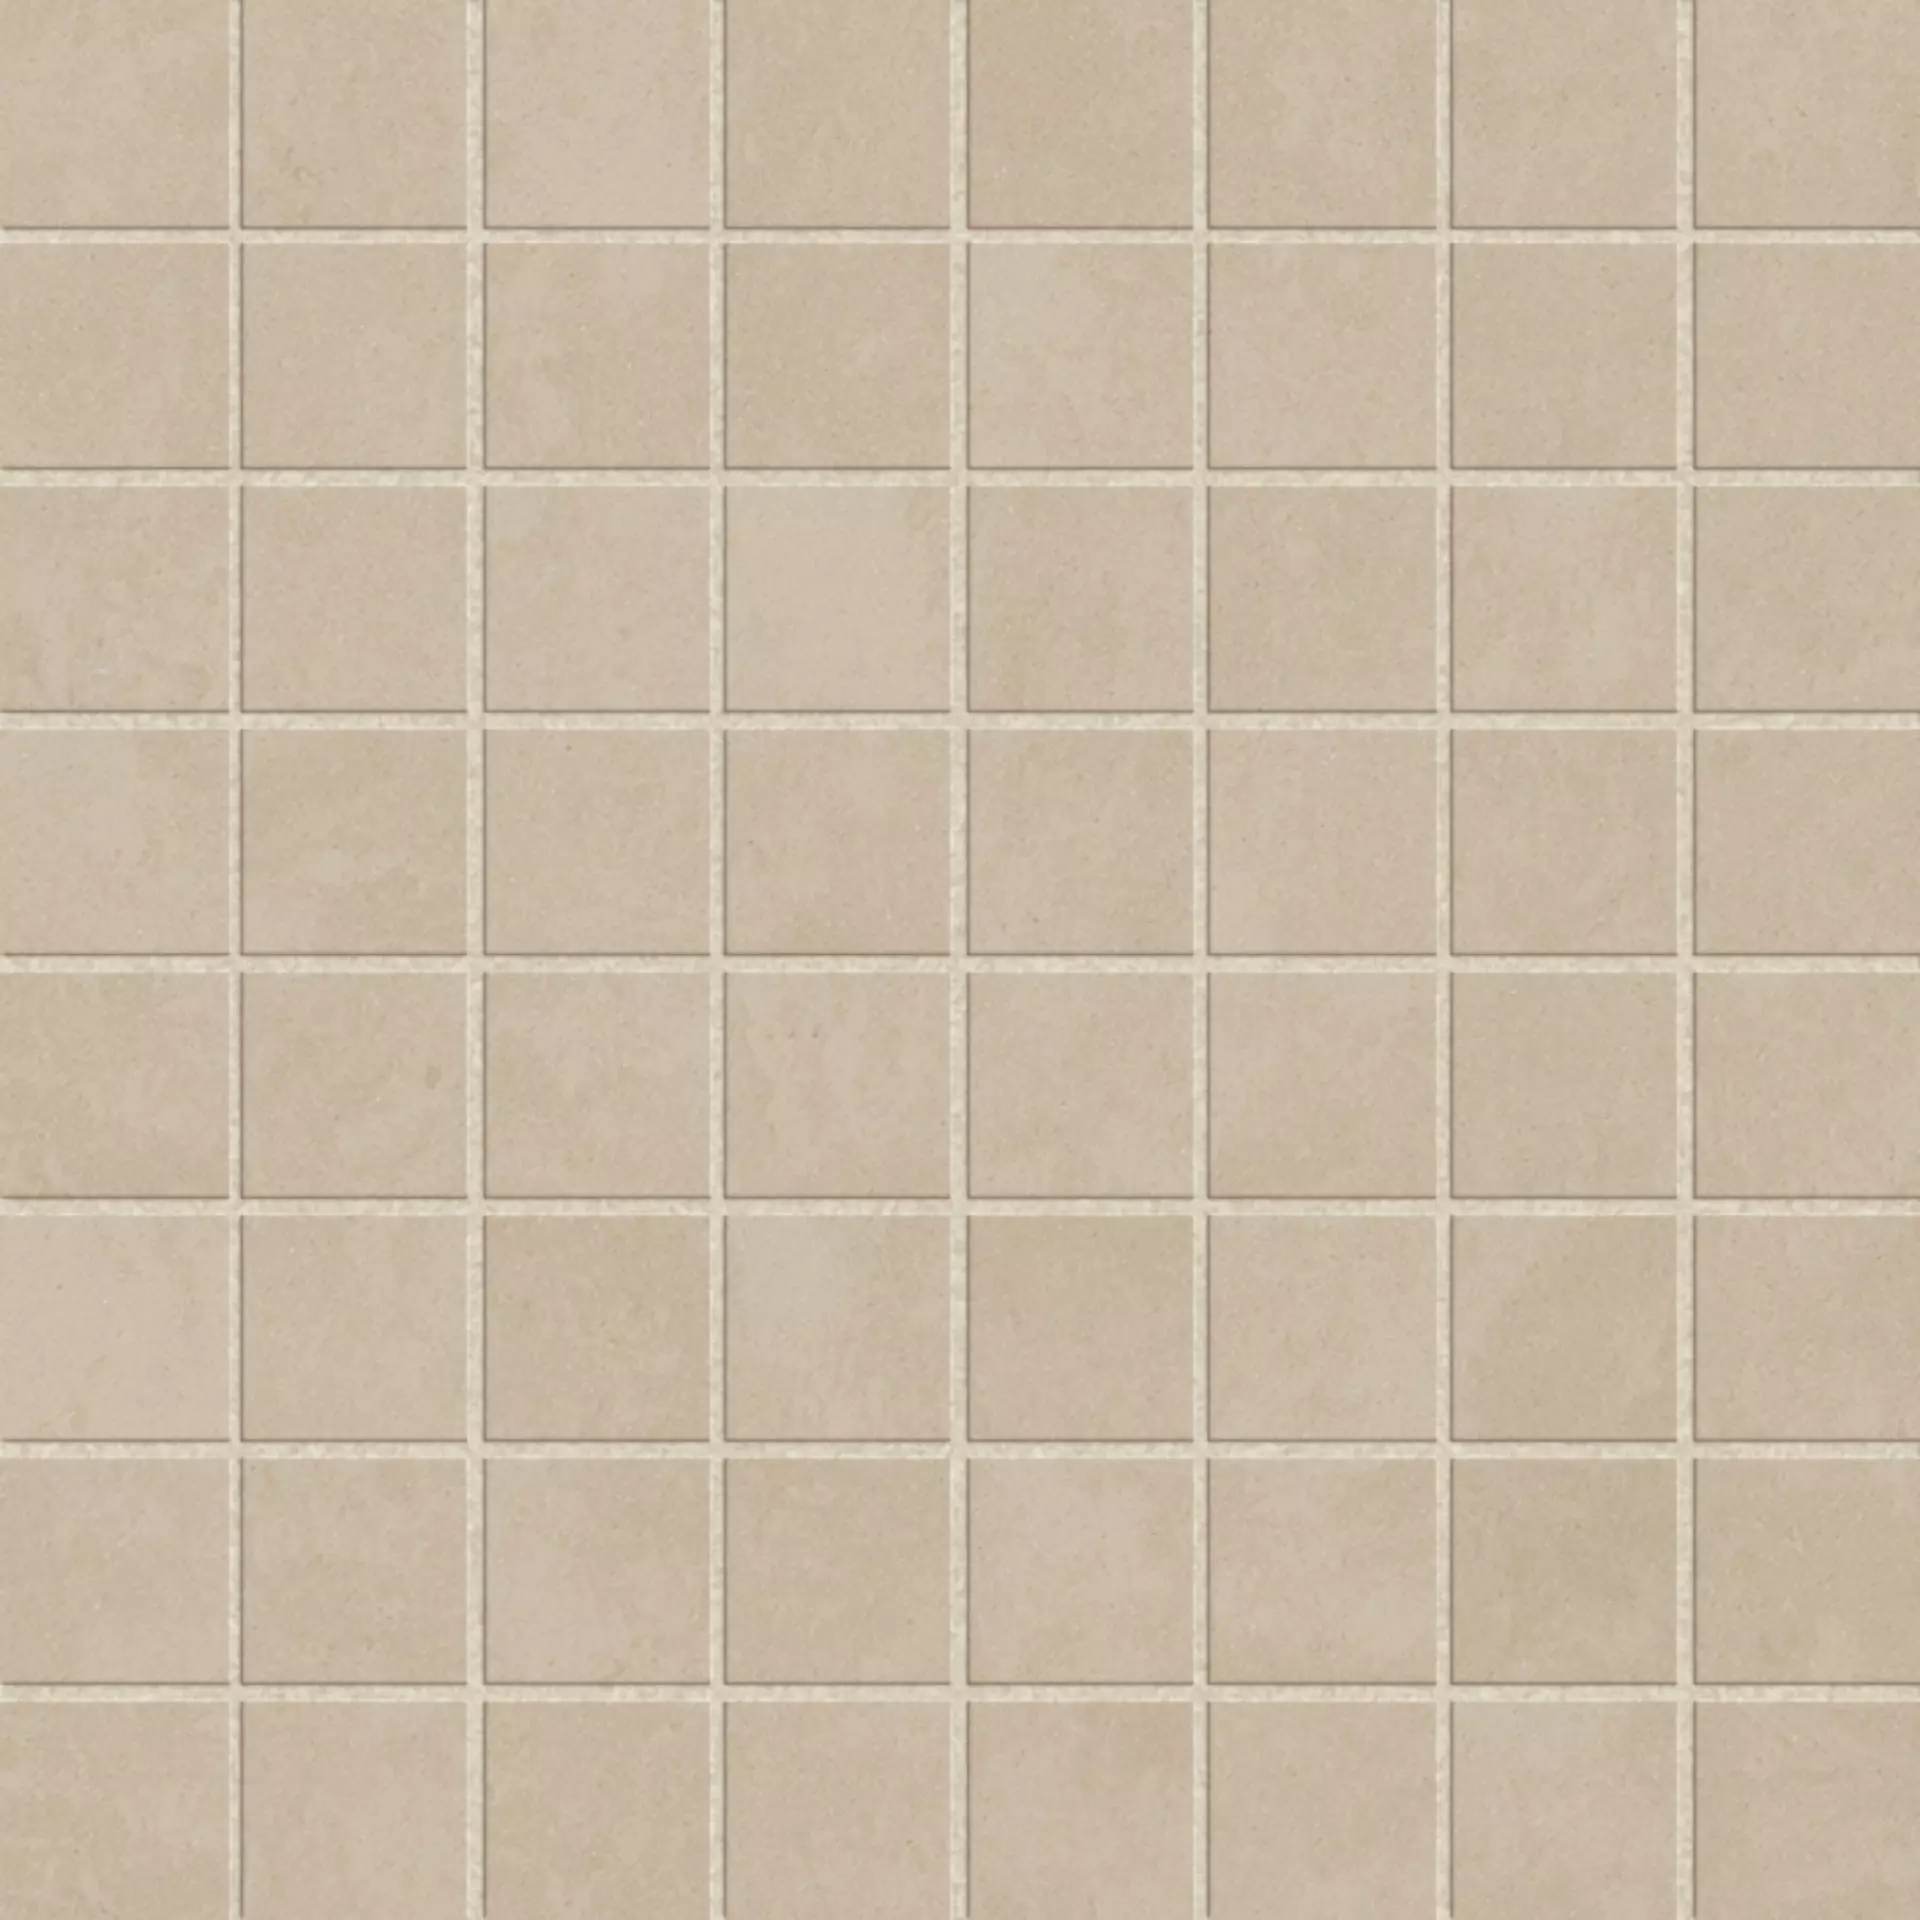 Margres Time 2.0 Cream Natural Mosaic 3,5x3,5 B25M33T23BF 30x30cm rectified 10,5mm